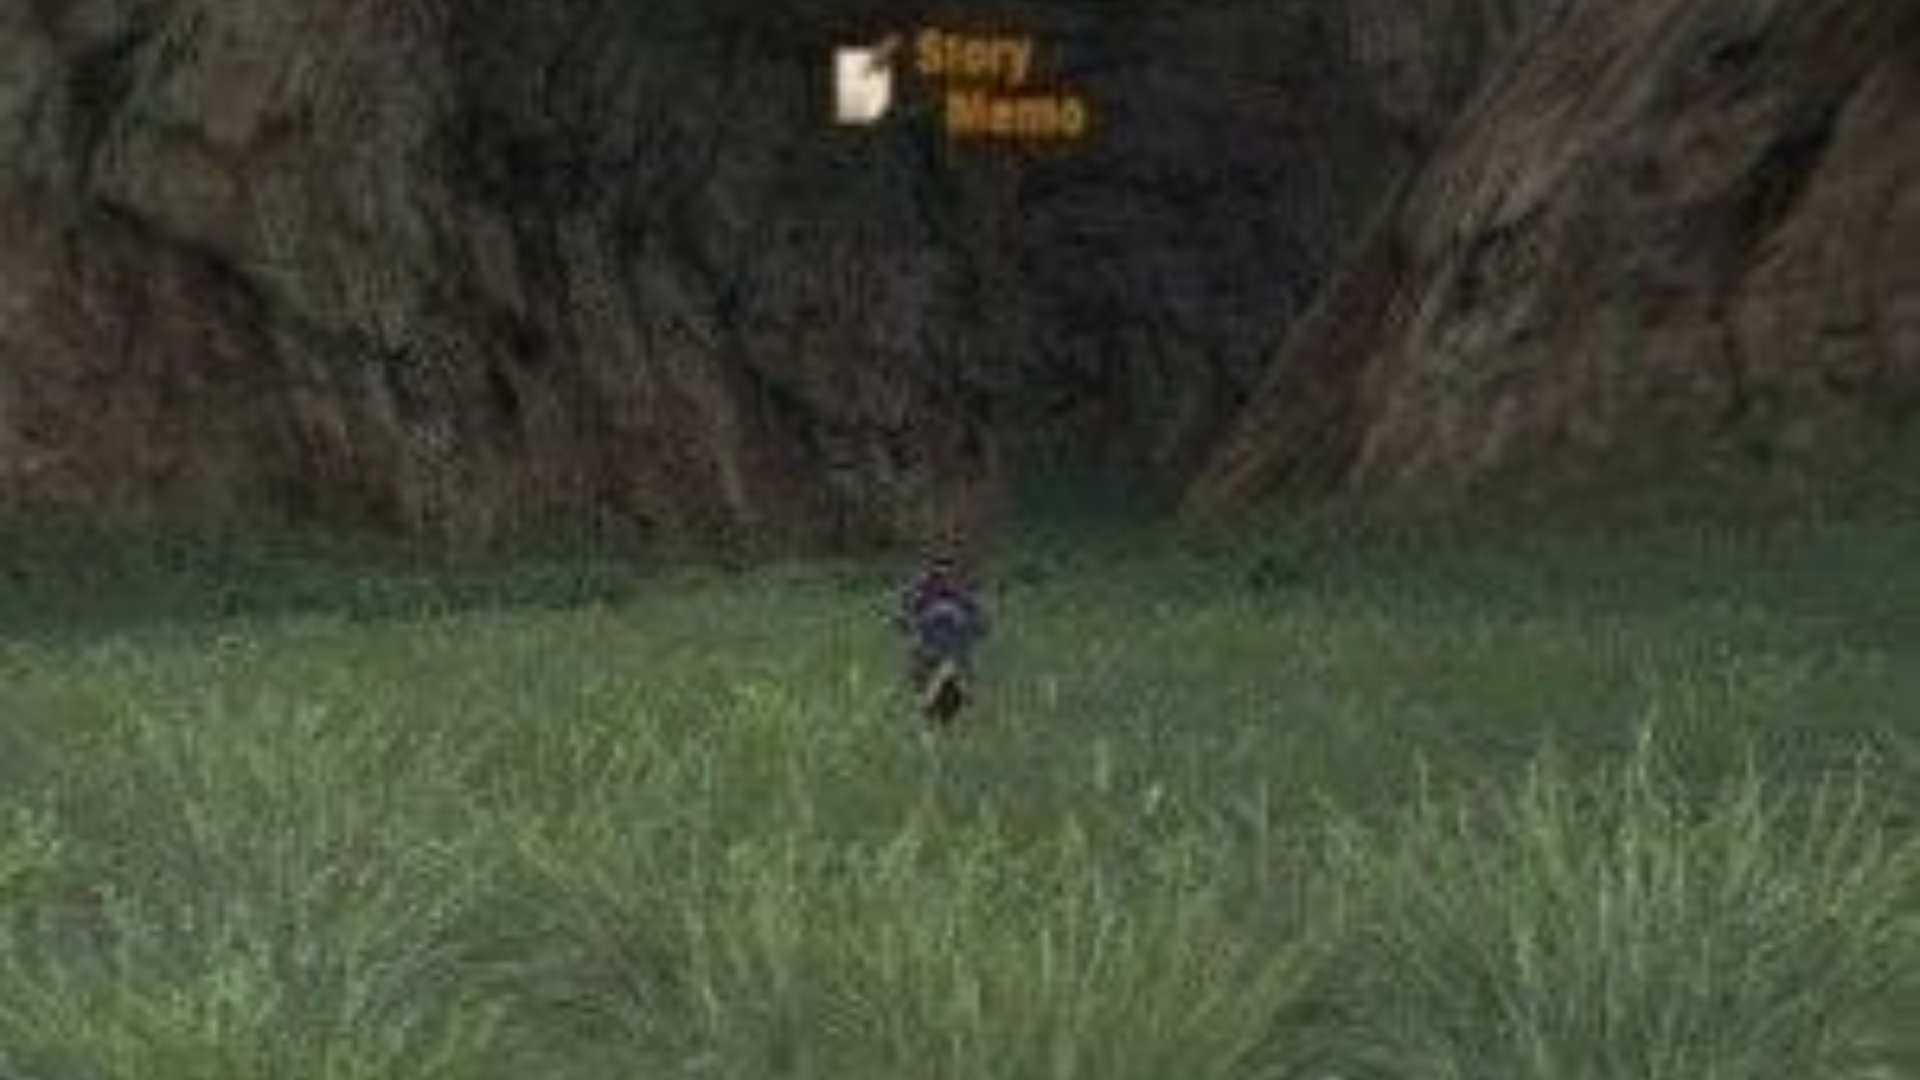 Xenoblade Chronicles 3D screenshot showing an open green meadow leading into a cave with a boy dressed in red running into it